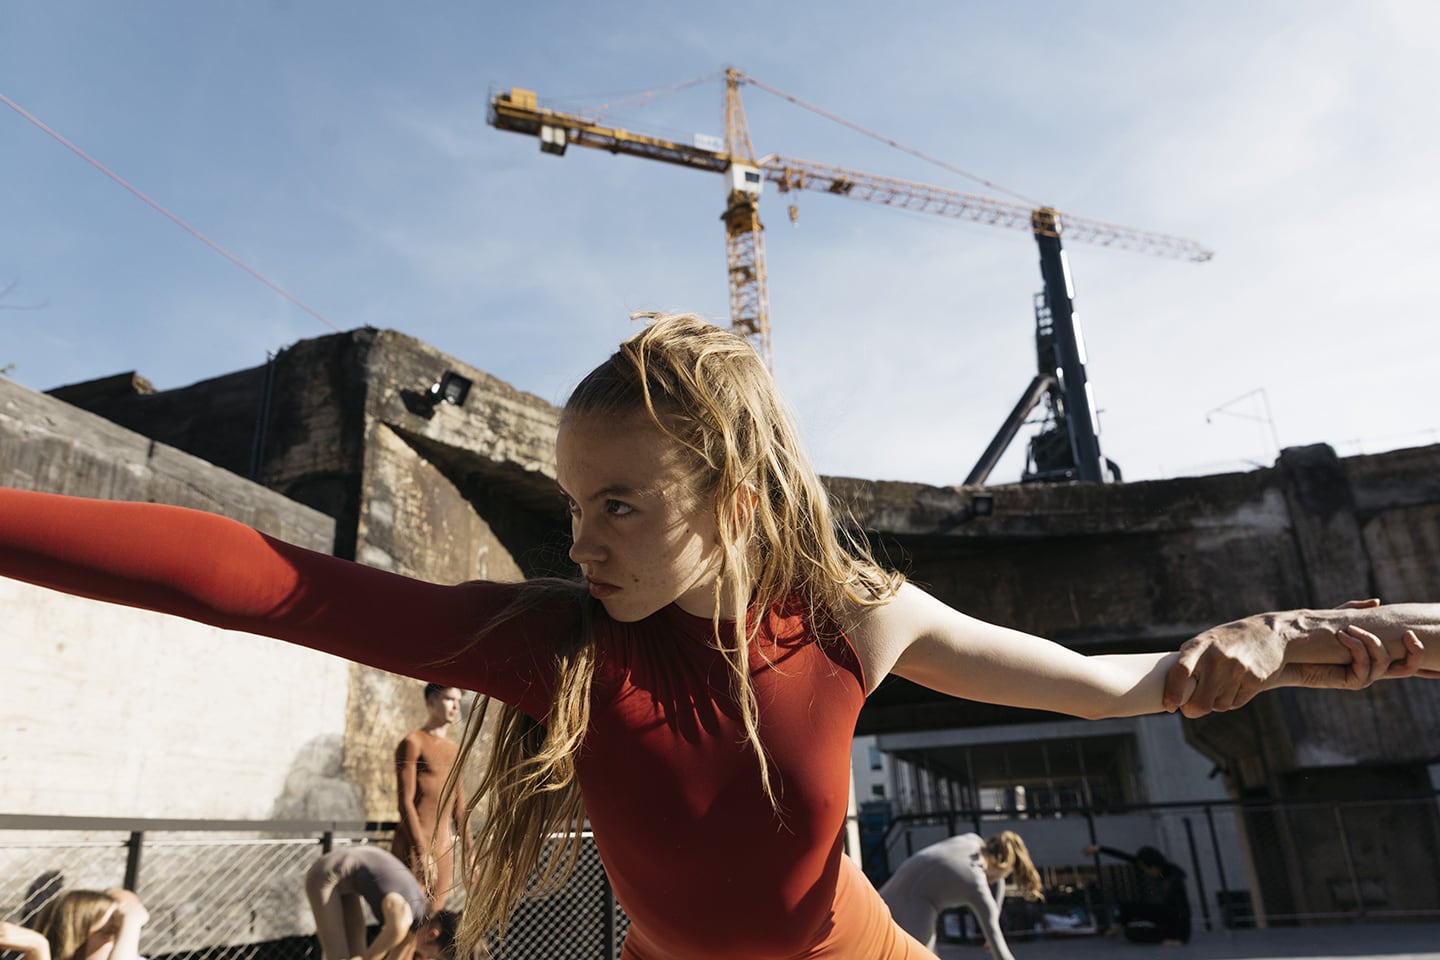 A crane in chimney as the background to a young female dancer in red leotard in the foreground, her arms stretching out to the edges of the frame